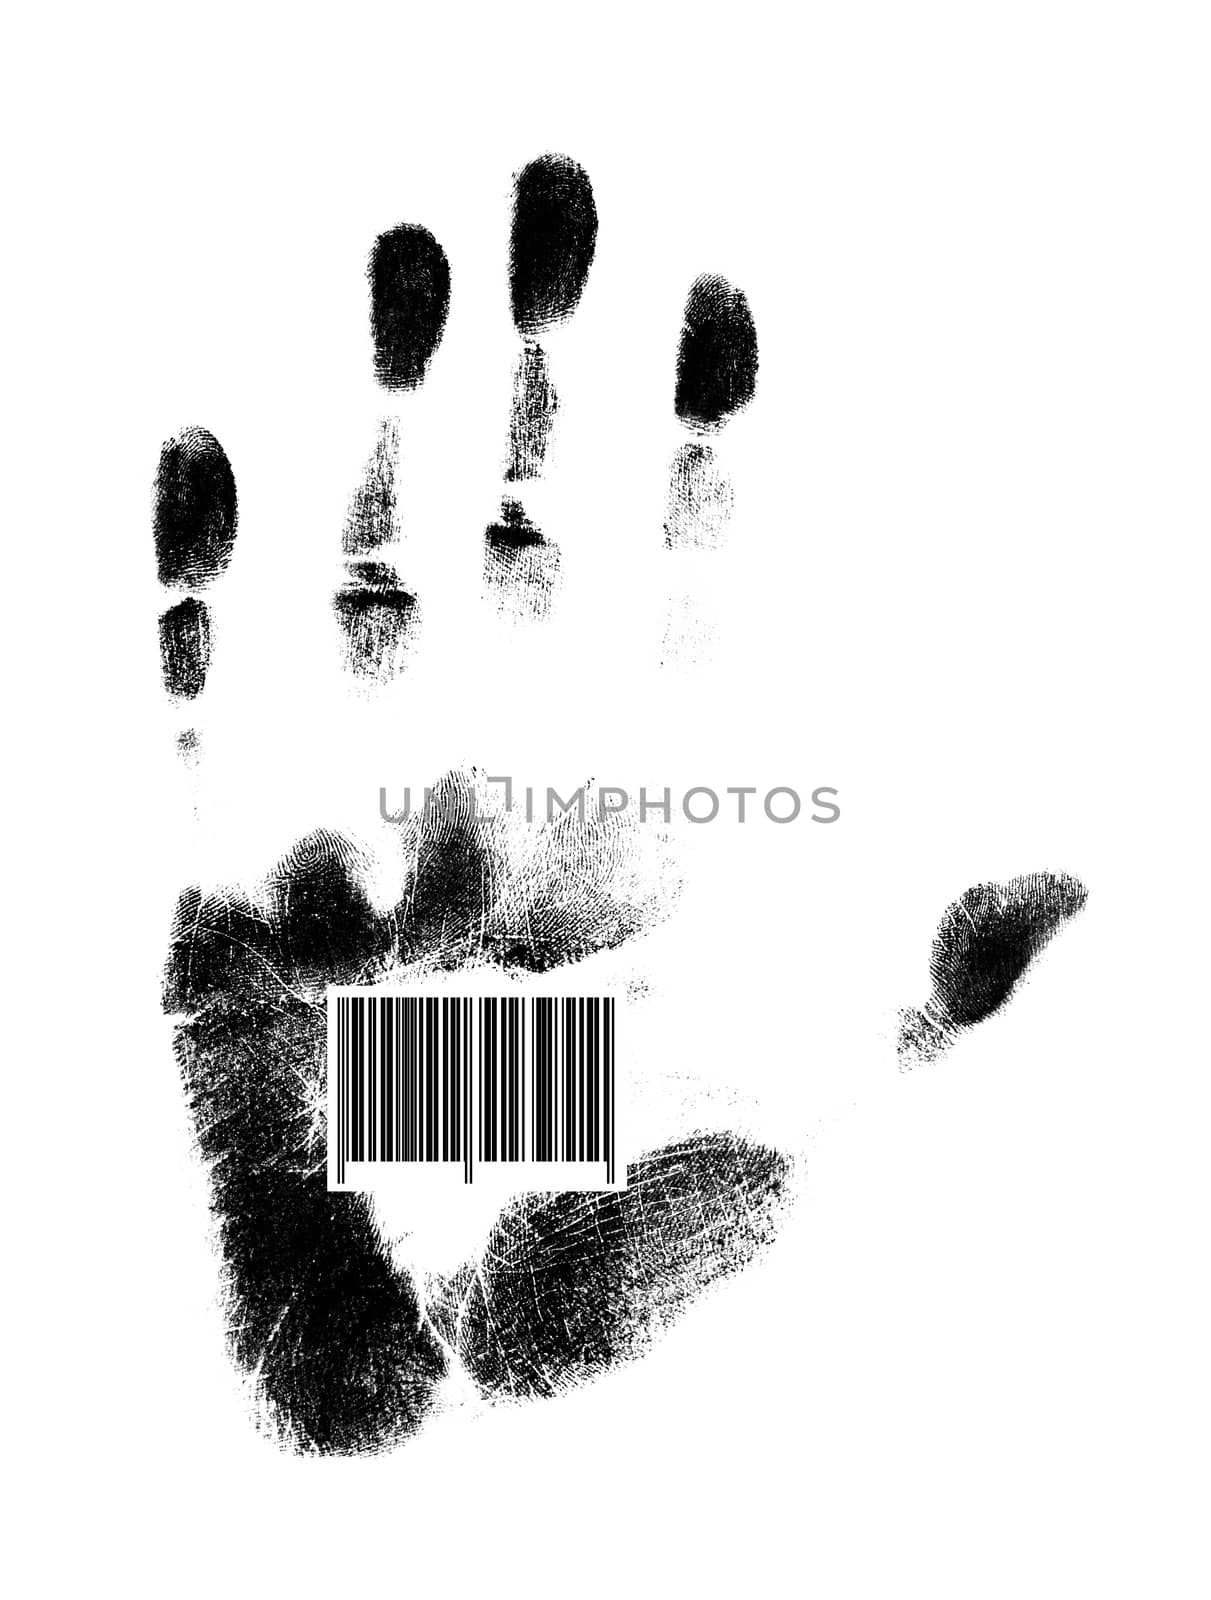 isolated human hand print with barcode (made by me)